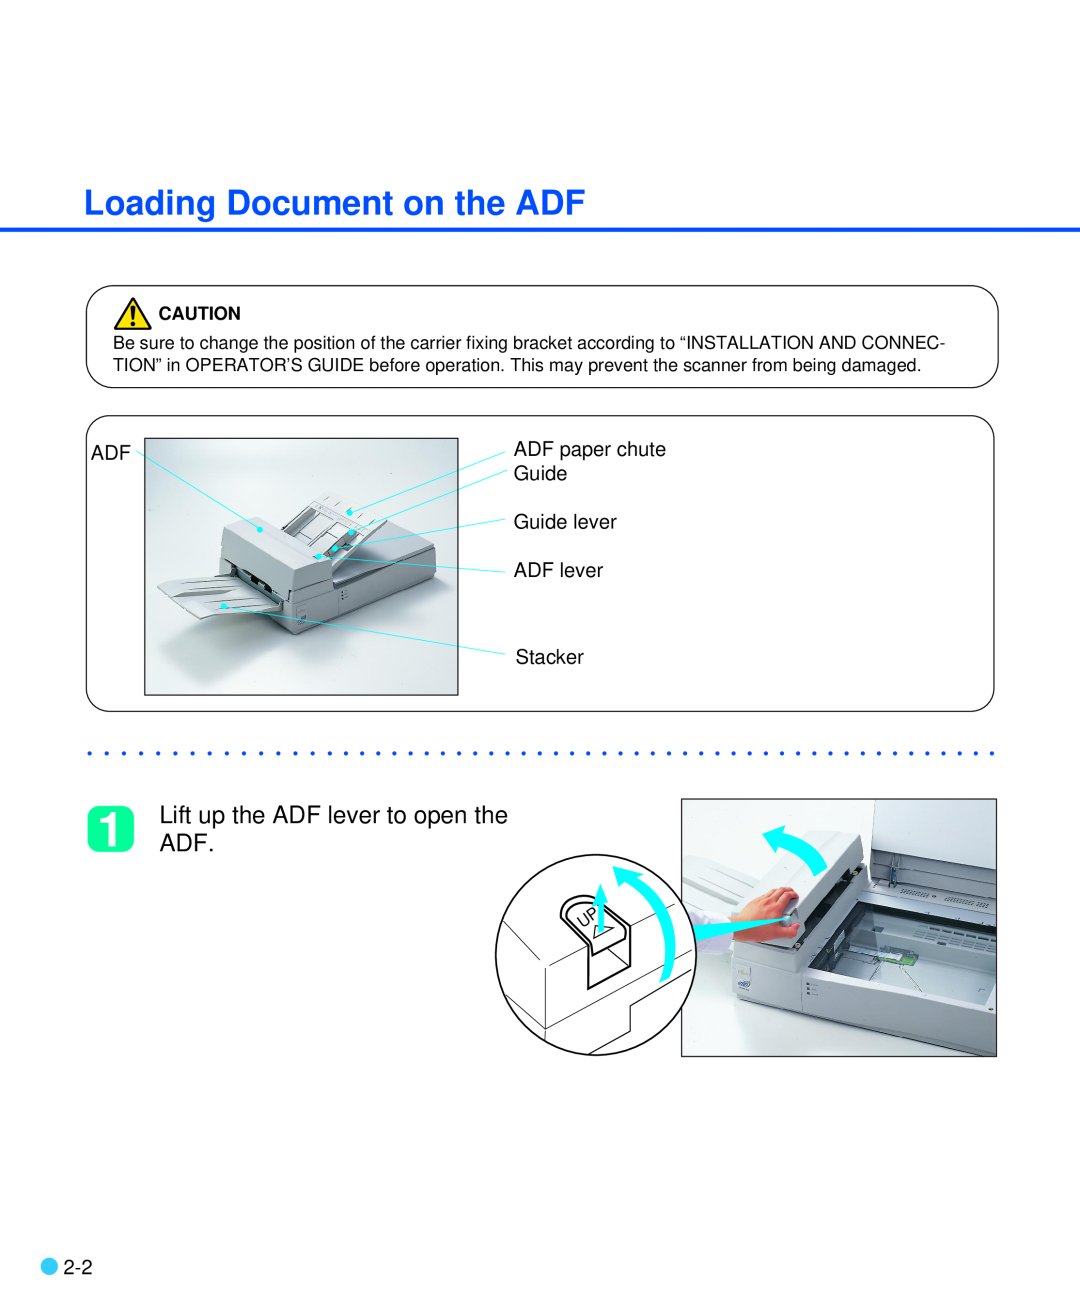 Fujitsu M3093DE/DG manual Loading Document on the ADF, Lift up the ADF lever to open the 1 ADF 